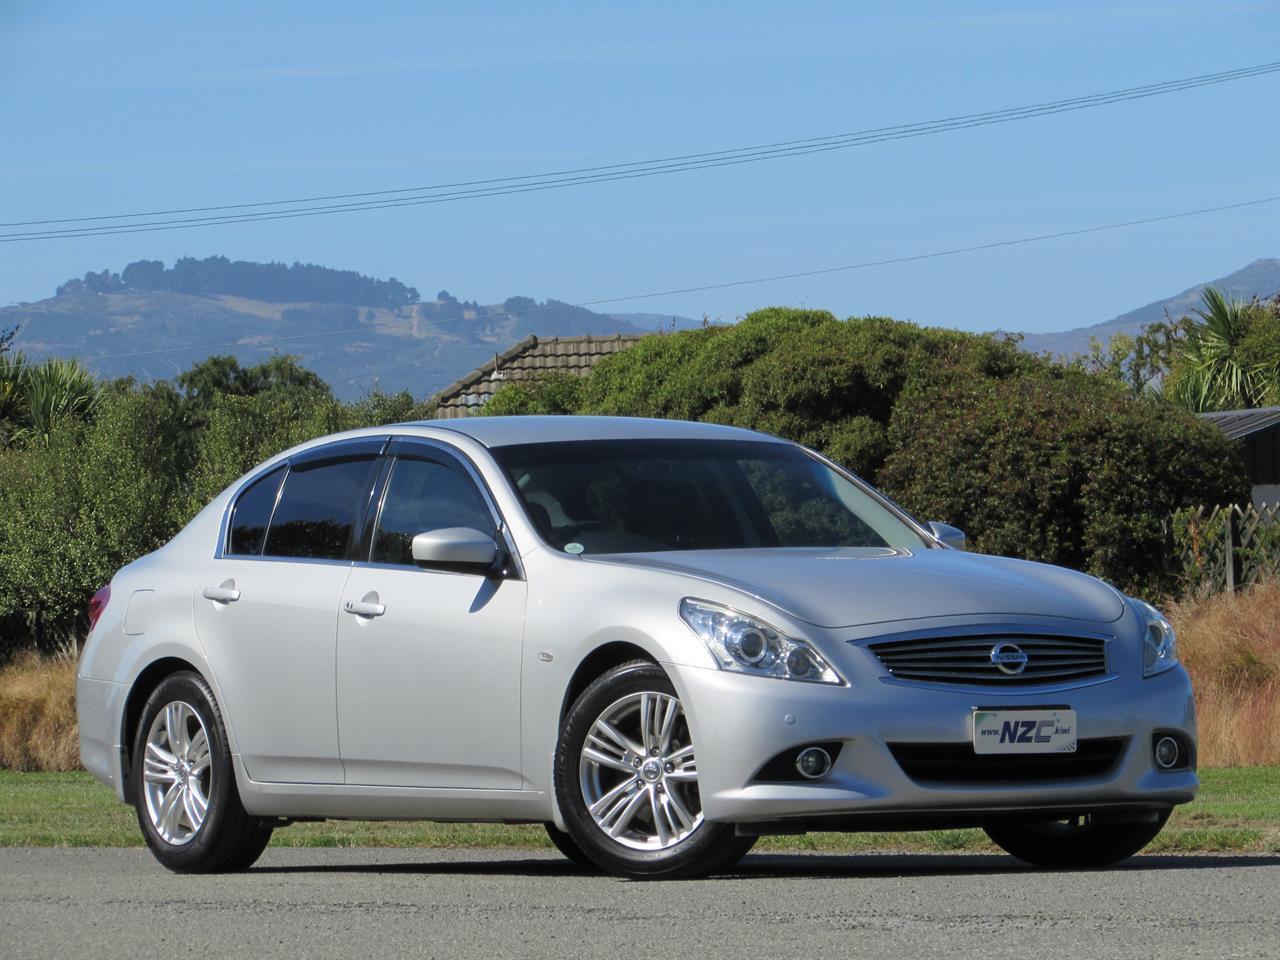 NZC best hot price for 2012 Nissan SKYLINE in Christchurch